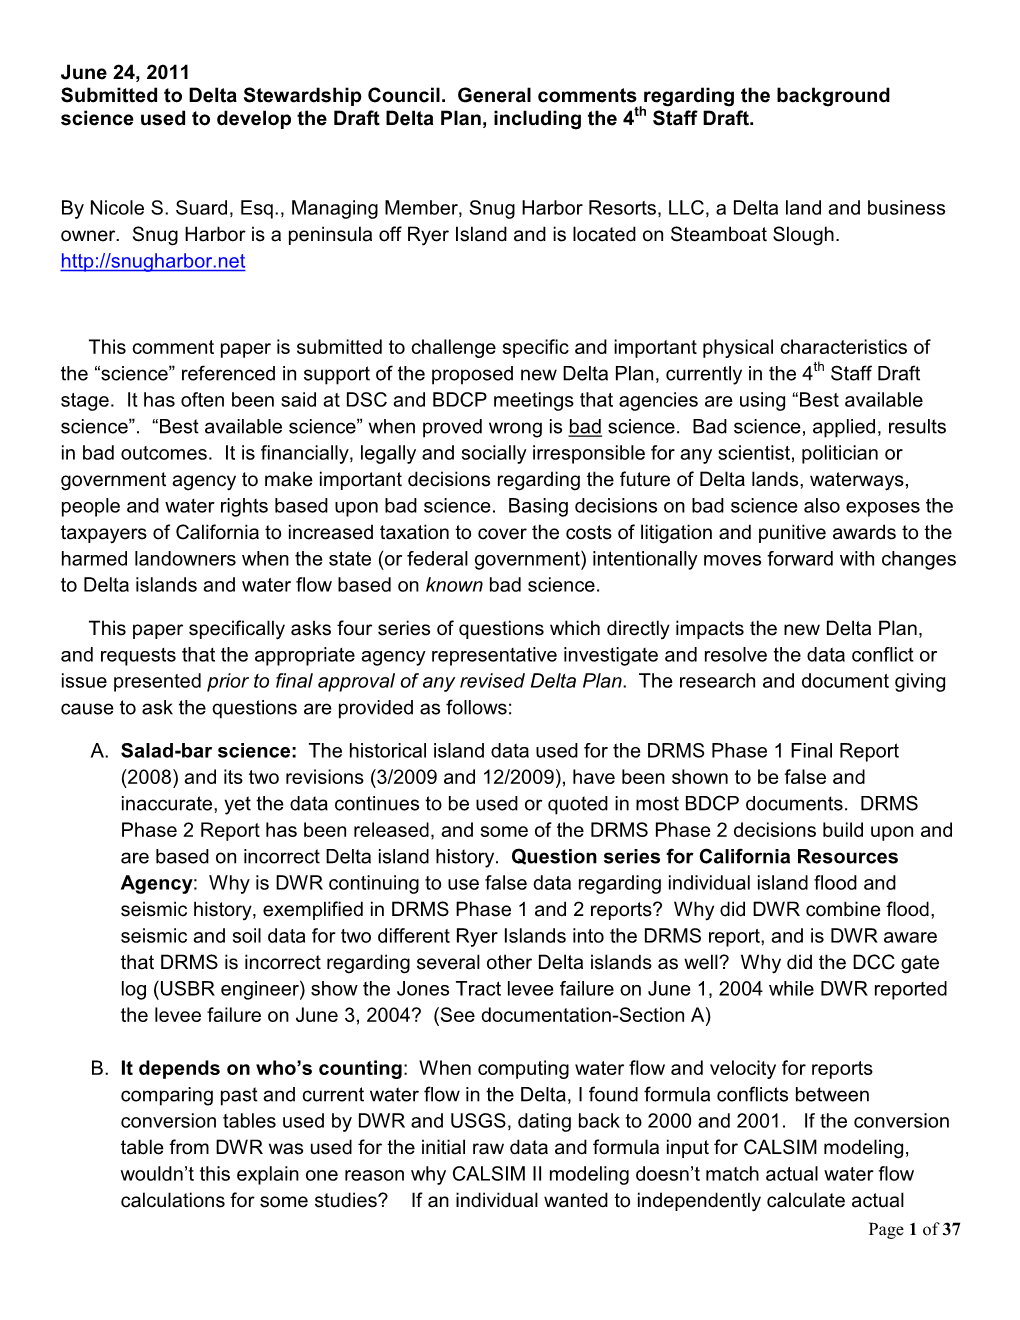 June 24, 2011 Submitted to Delta Stewardship Council. General